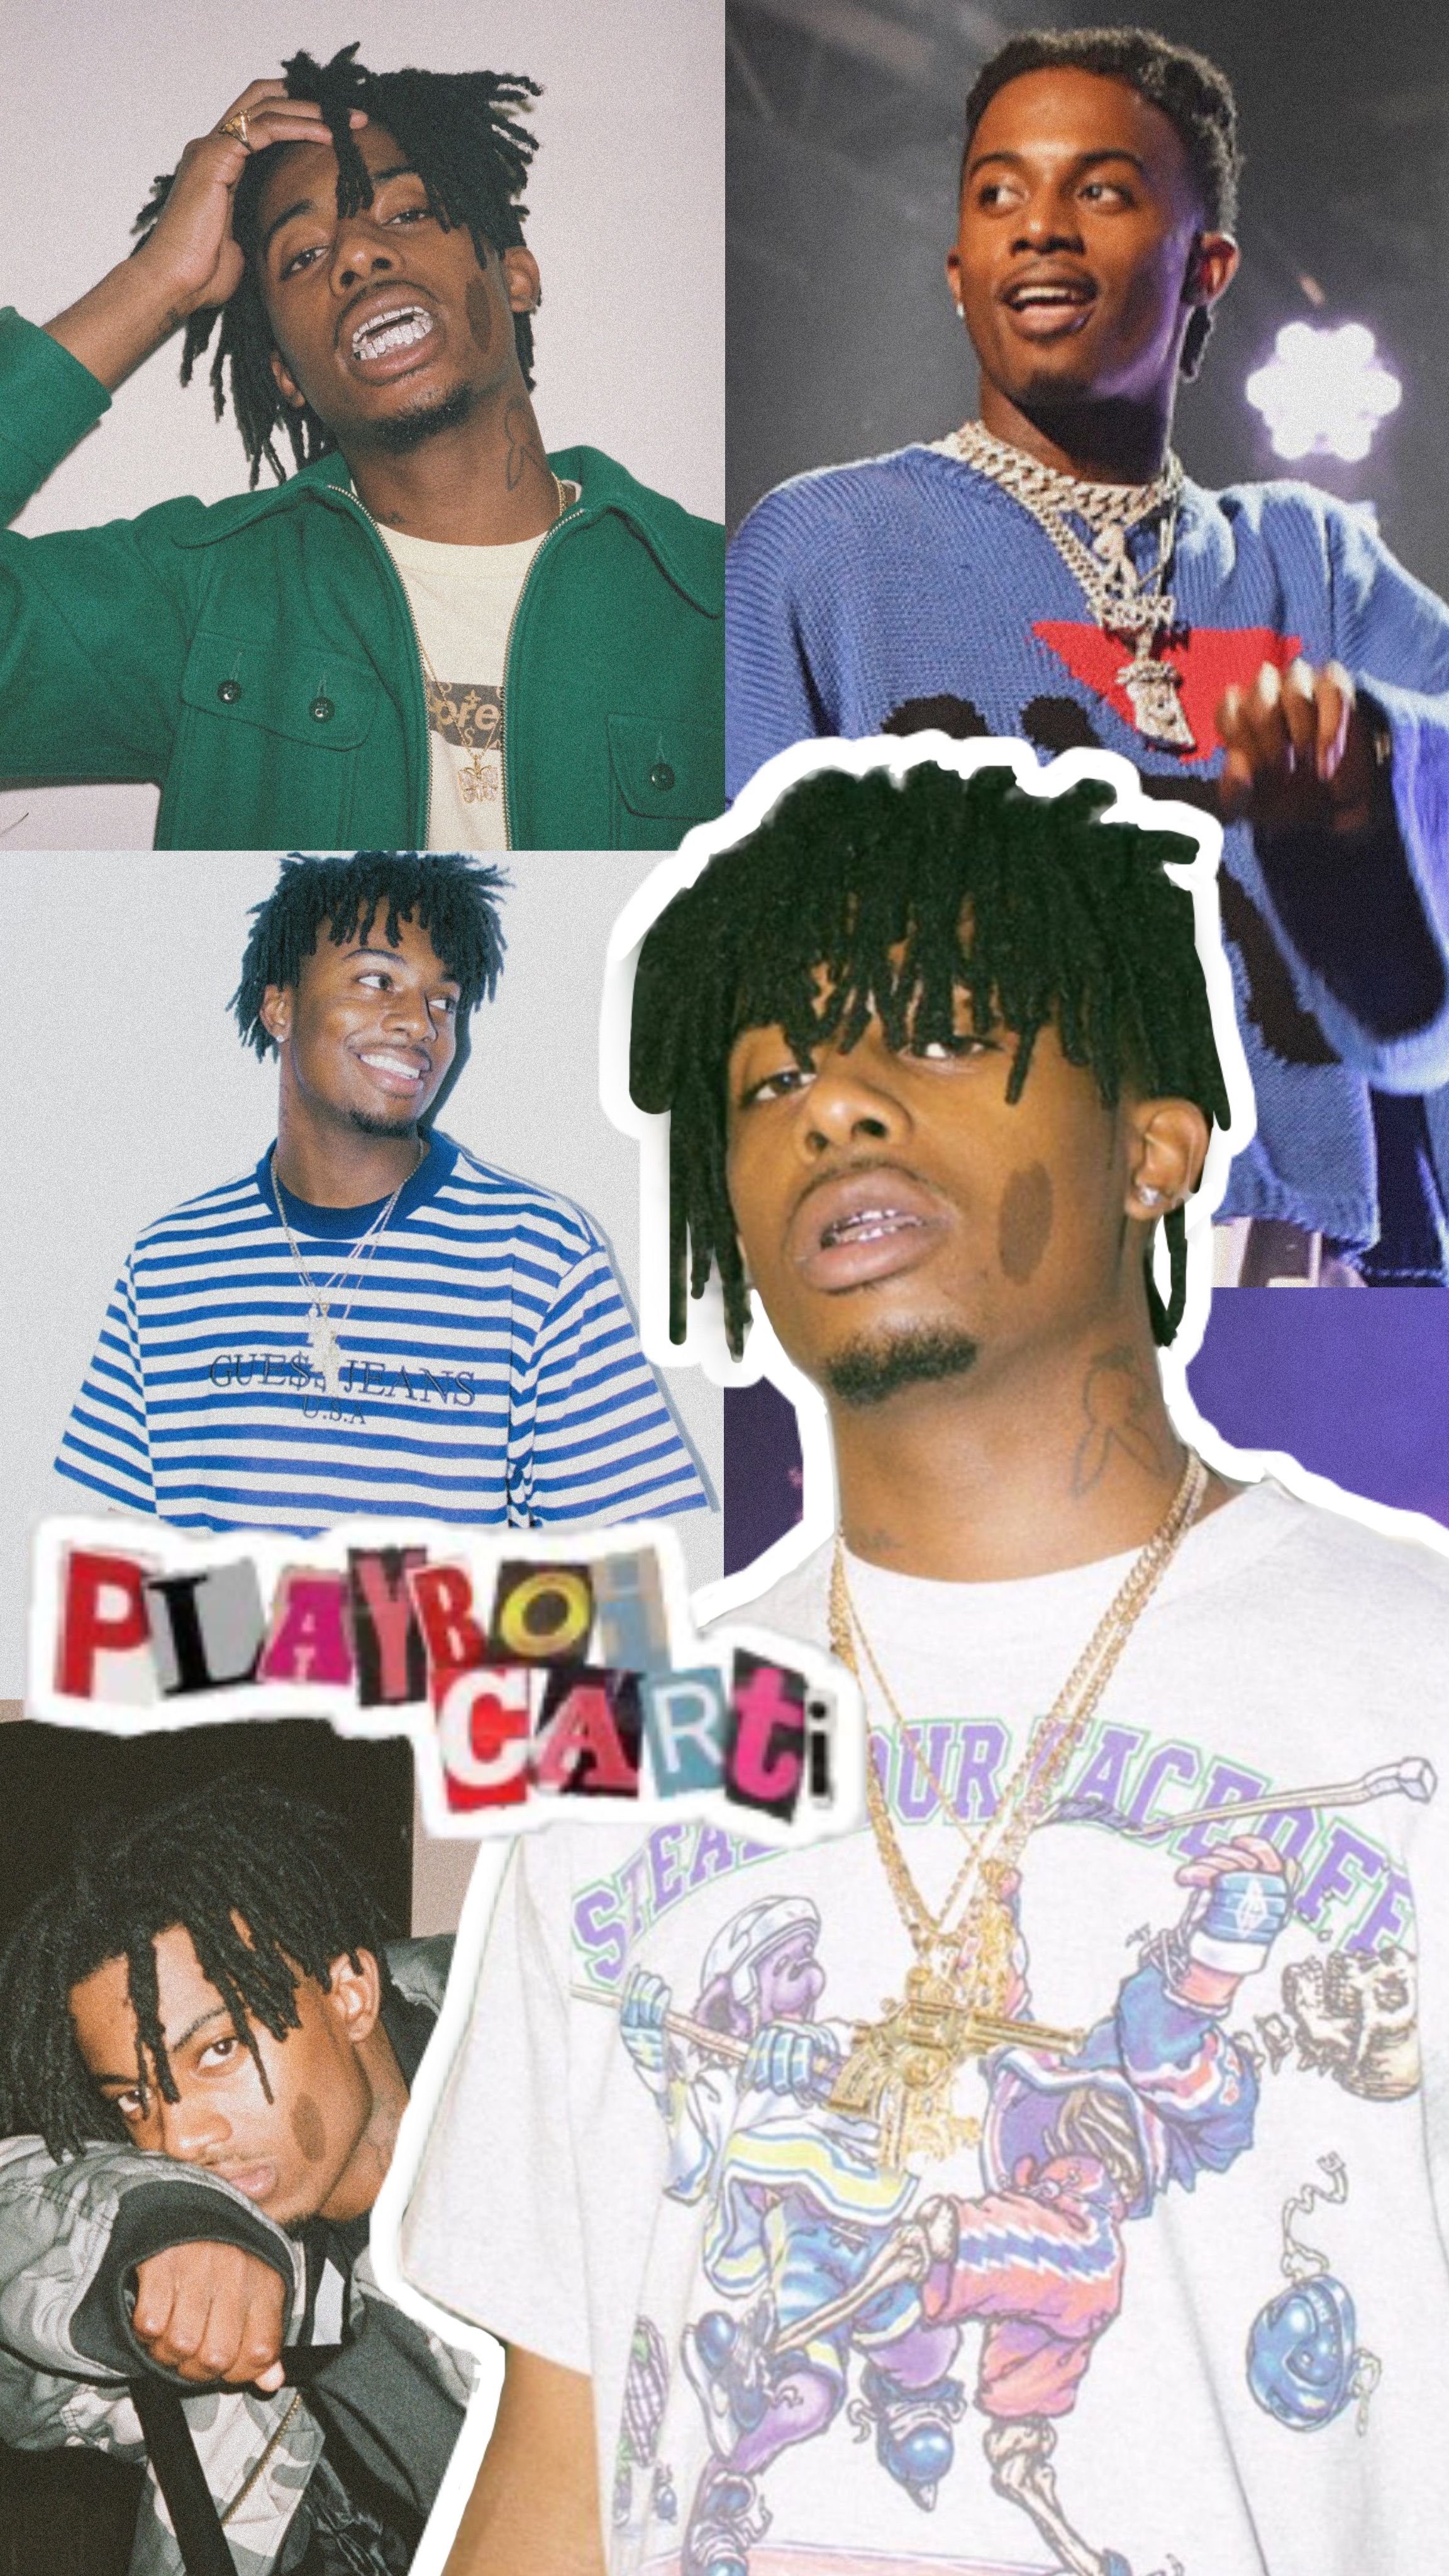 Cool Playboi Carti Wallpaper for Your Phone